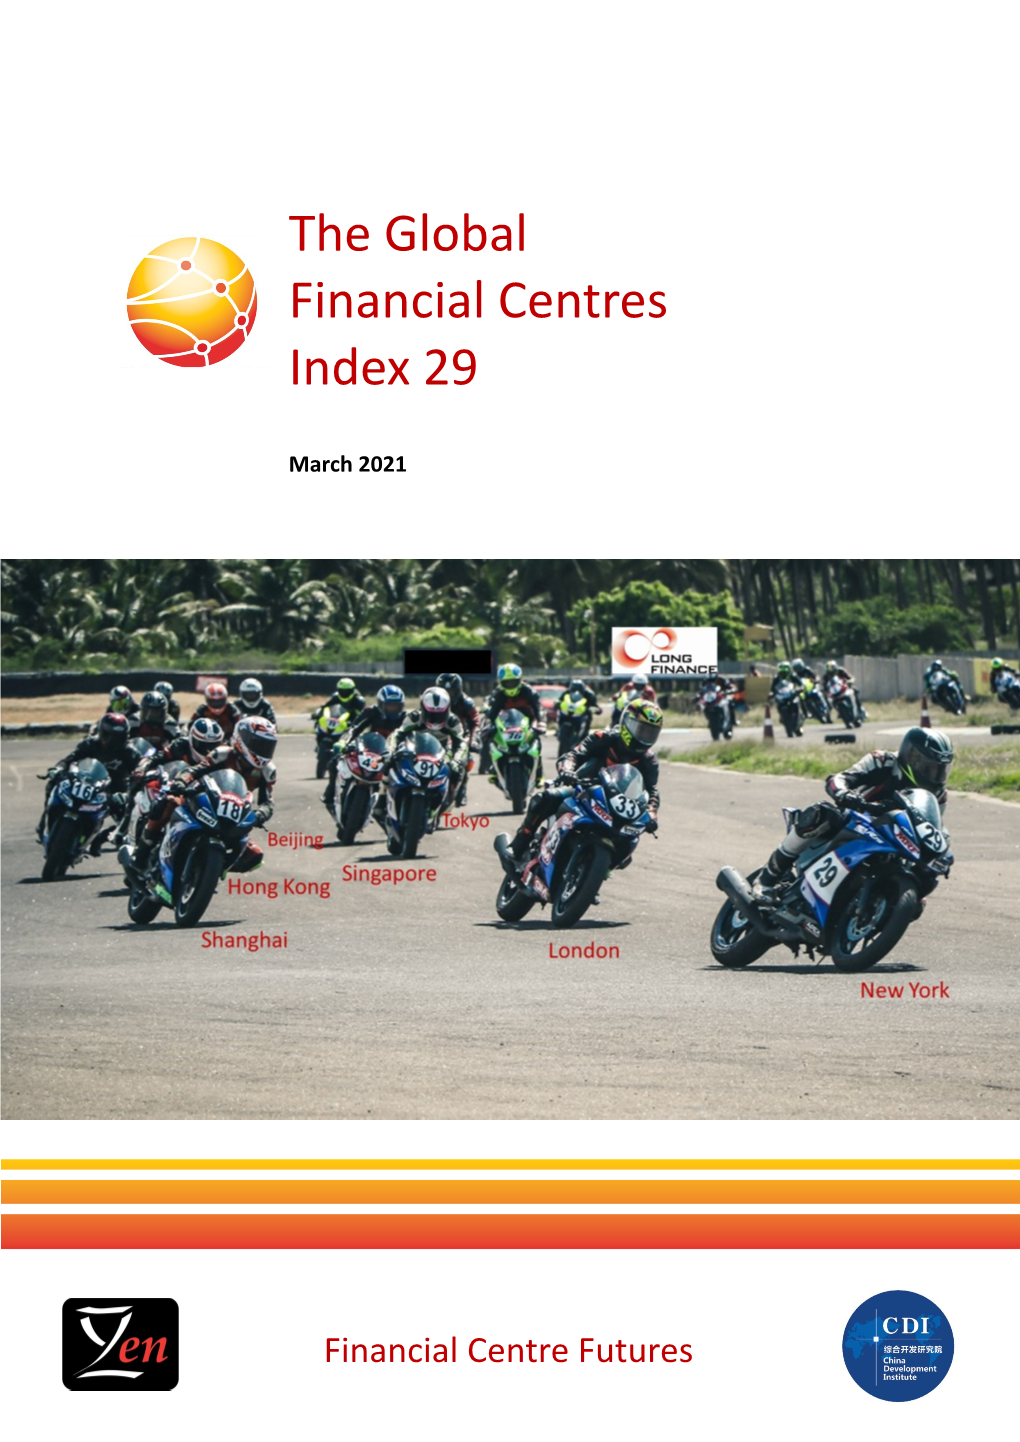 The Global Financial Centres Index 29